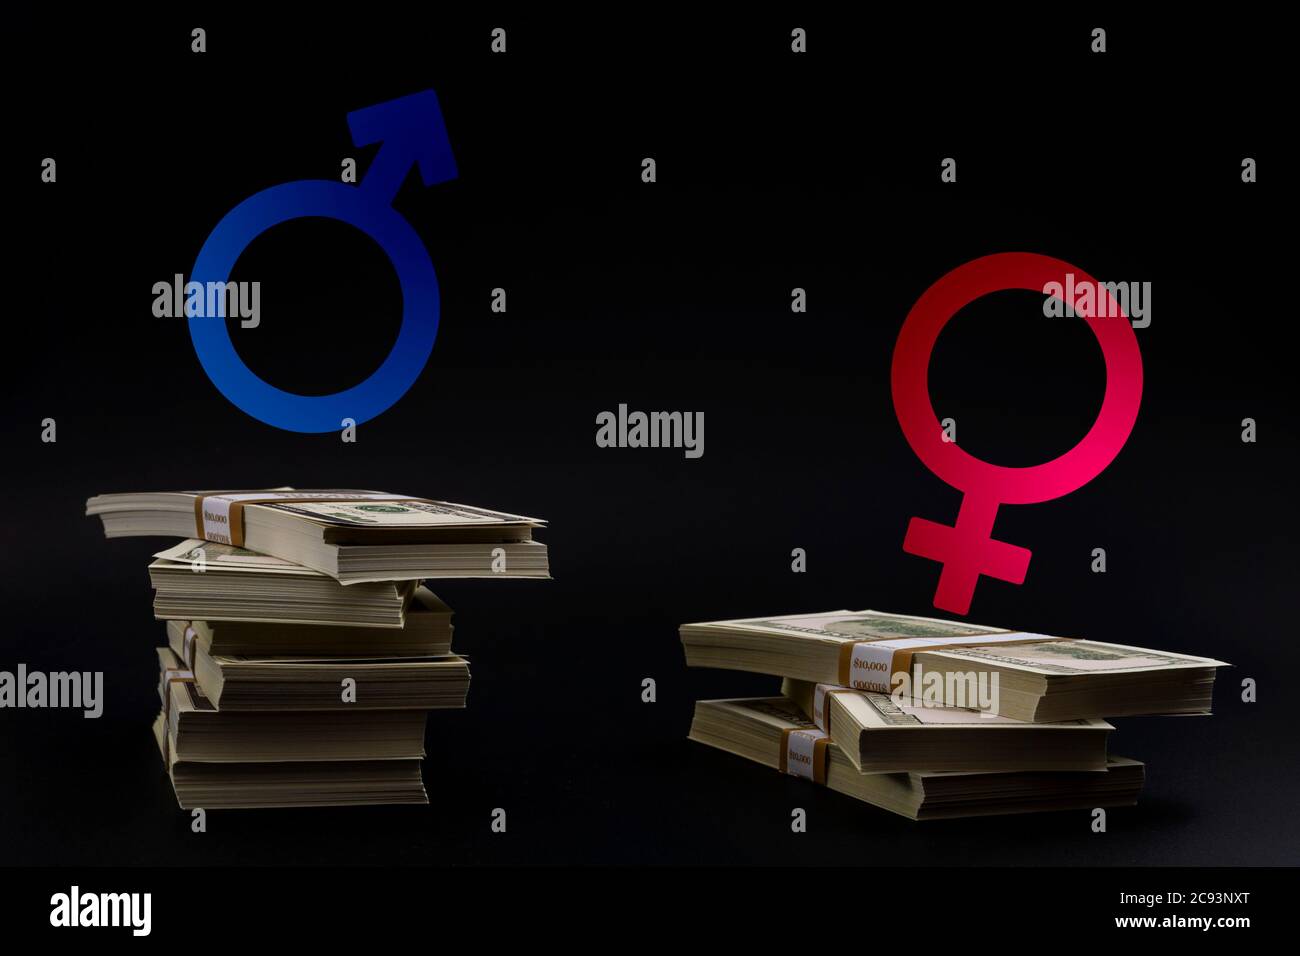 The pay gap and discrimination conceptual idea with the Mars symbol for men and Venus symbol for women on top of unequal stacks of money representing Stock Photo